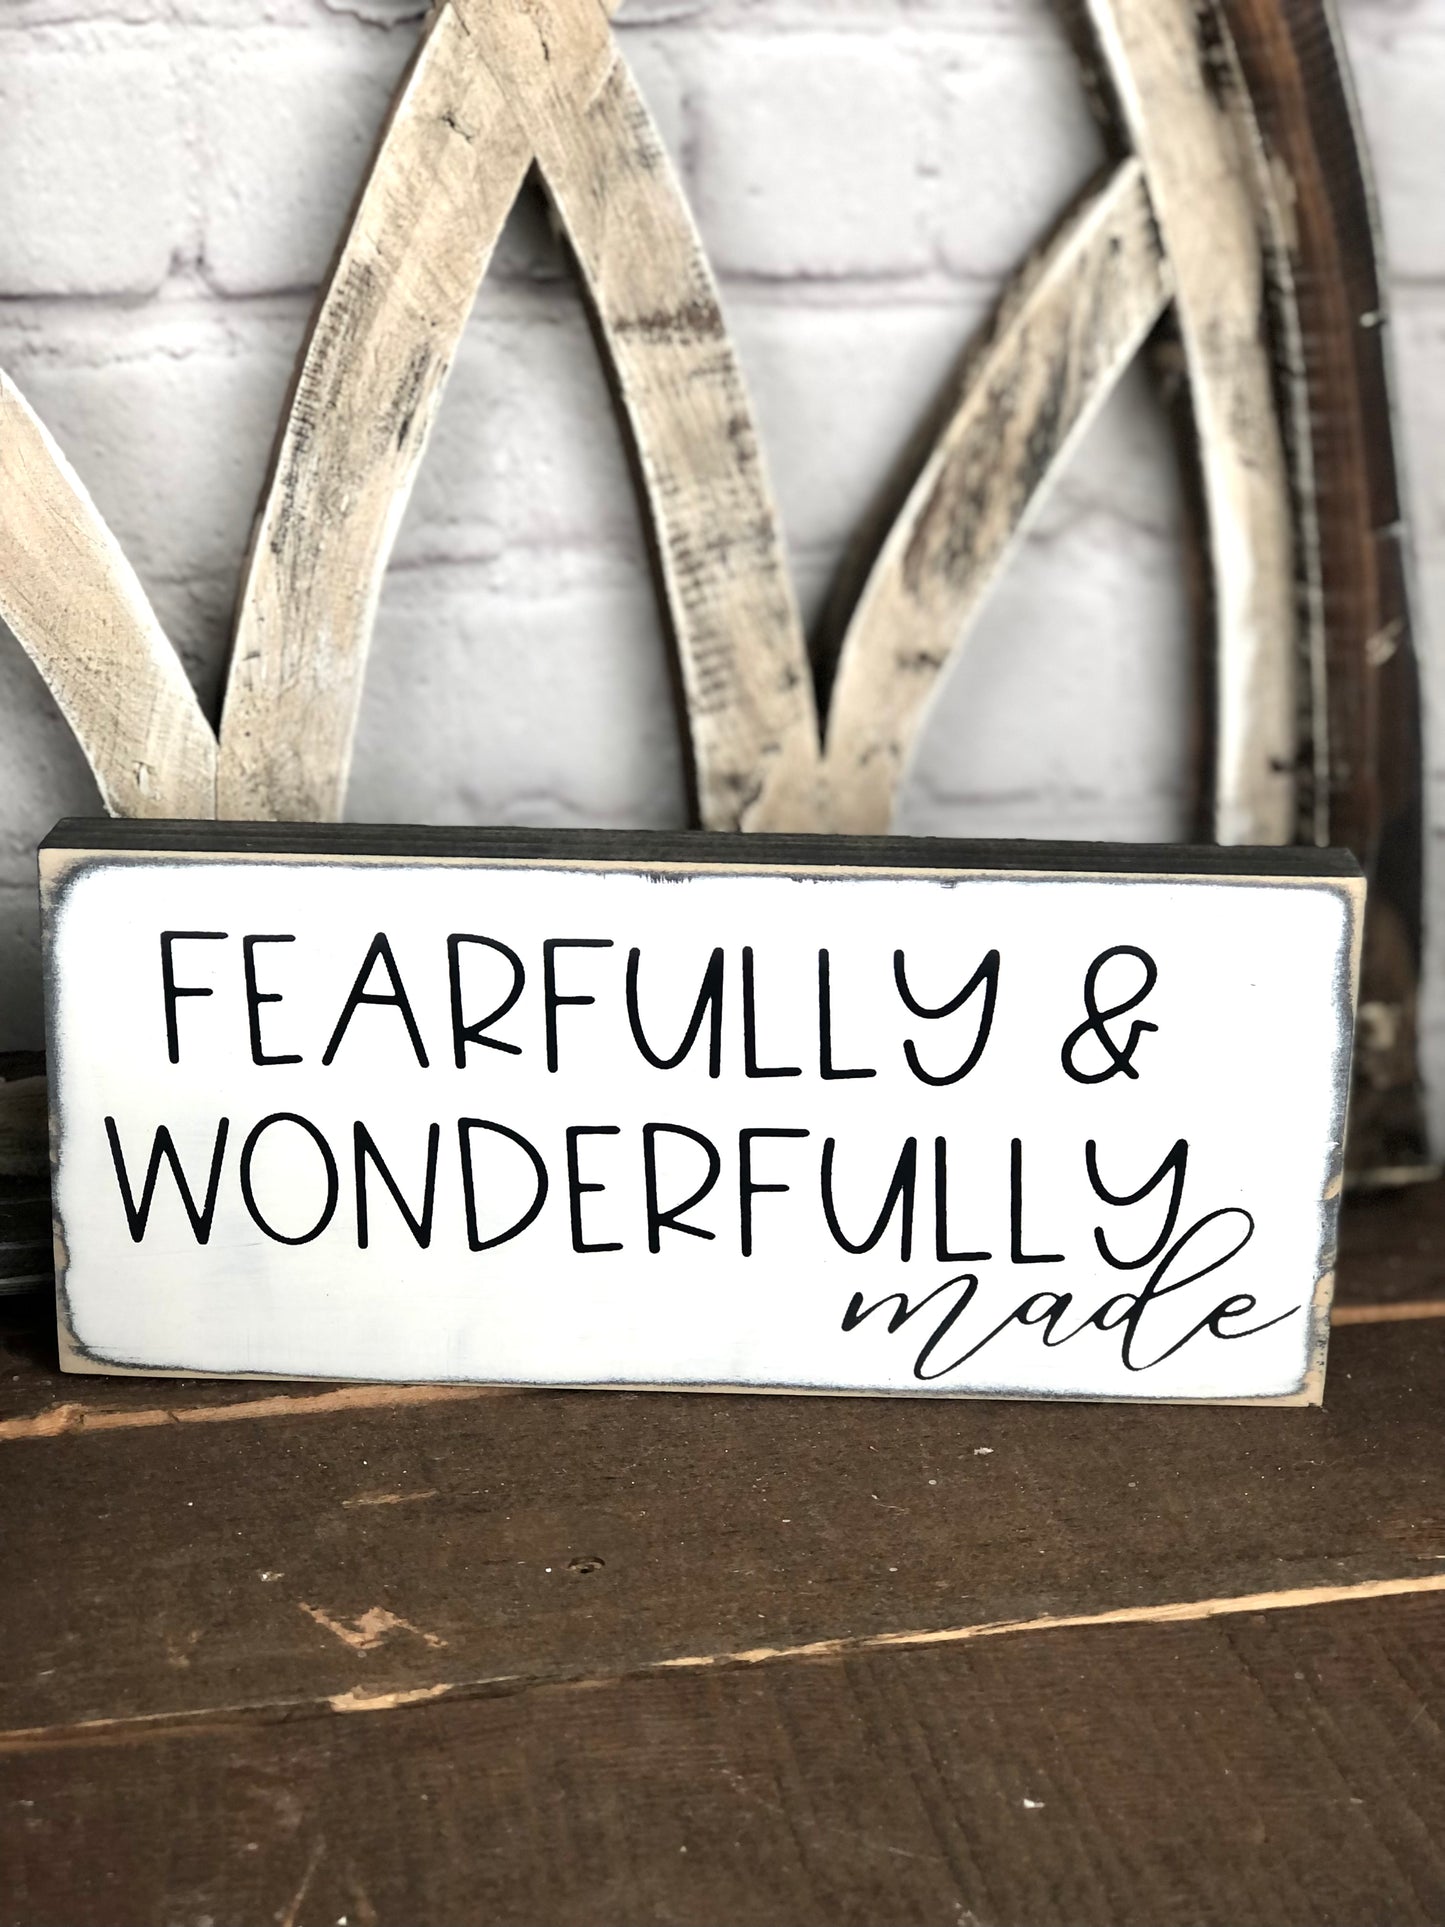 FEARFULLY AND WONDERFULLY MADE- WOOD SIGN